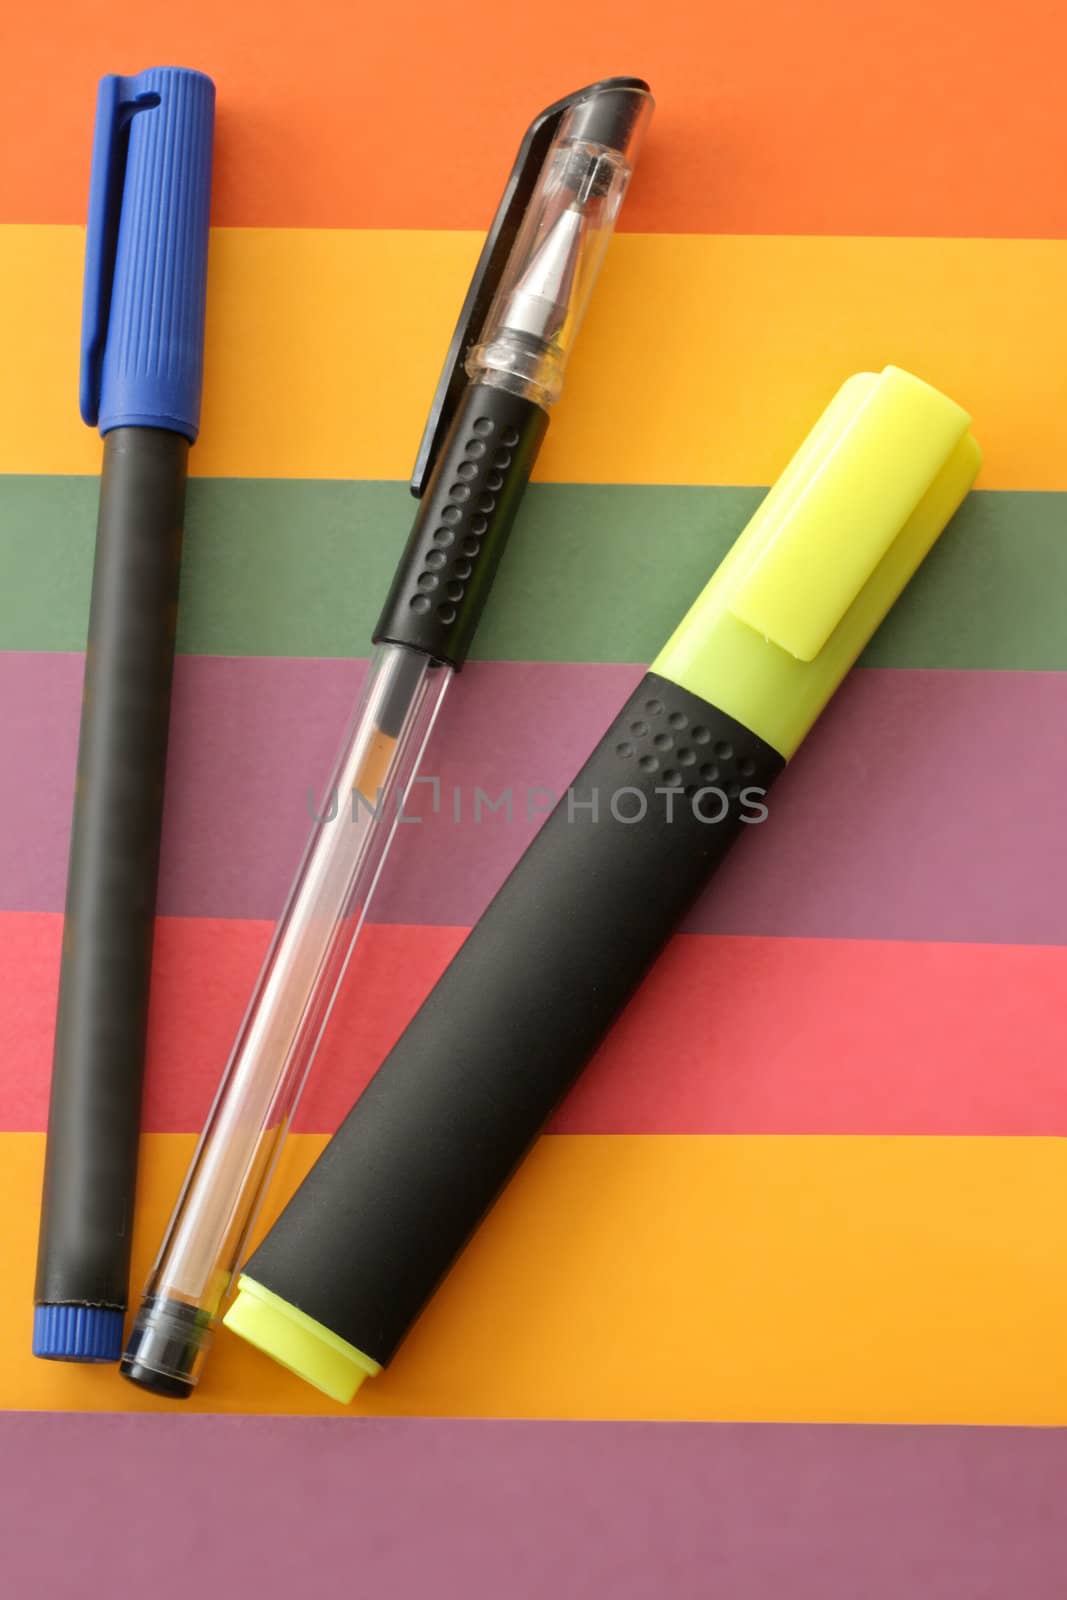 Highlight pens on a colorful background
